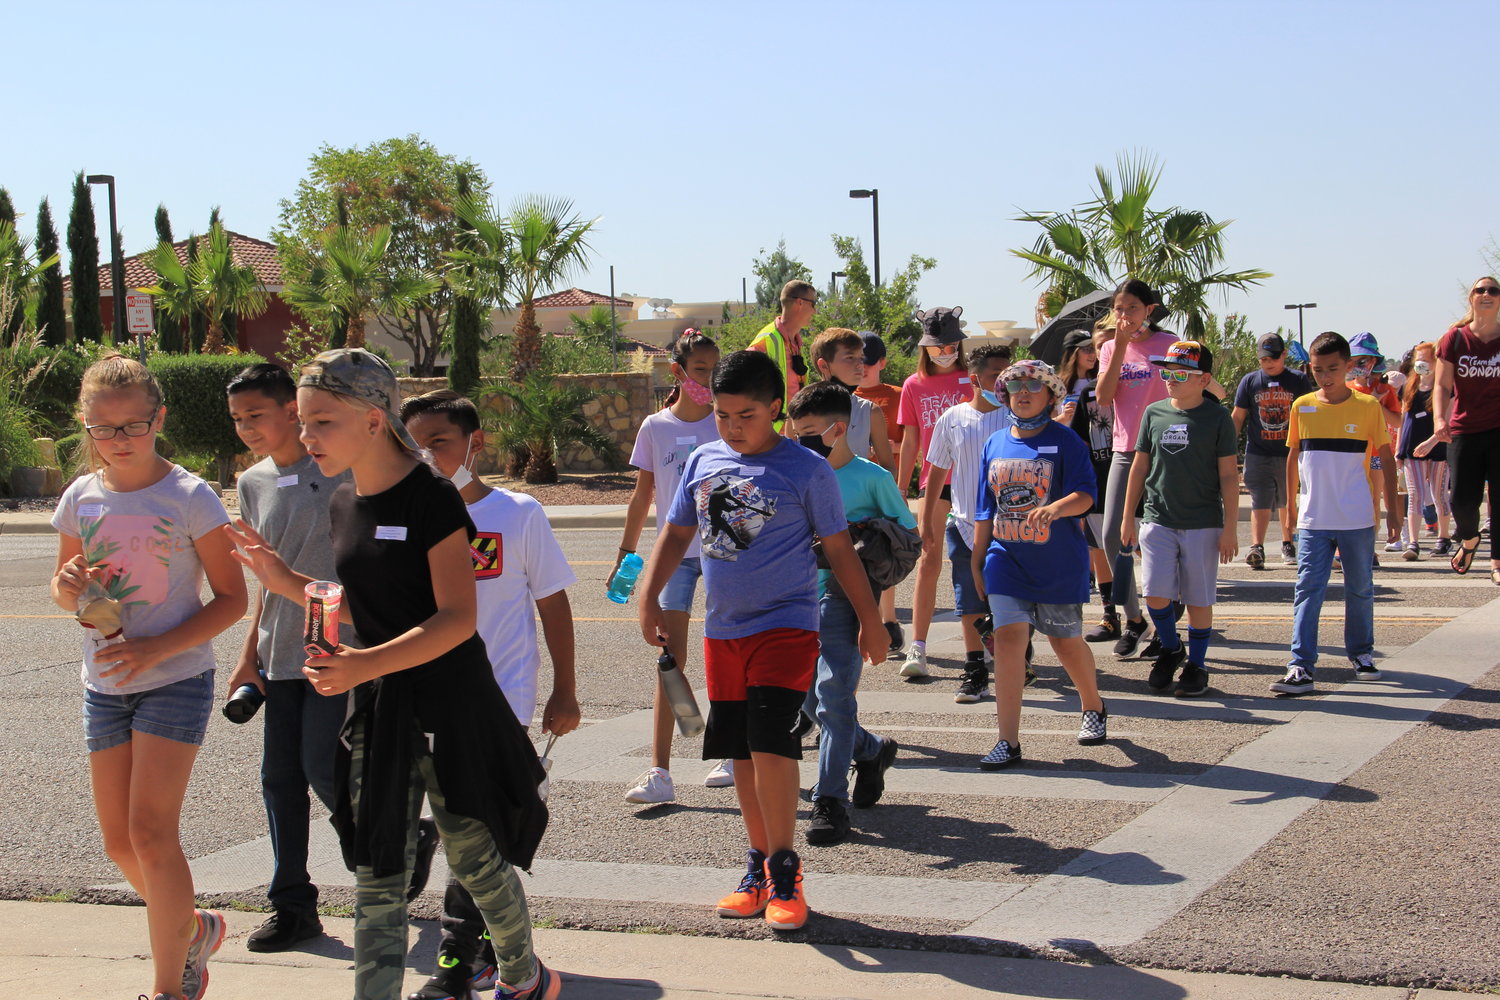 Students from Sonoma Elementary walking to
school.